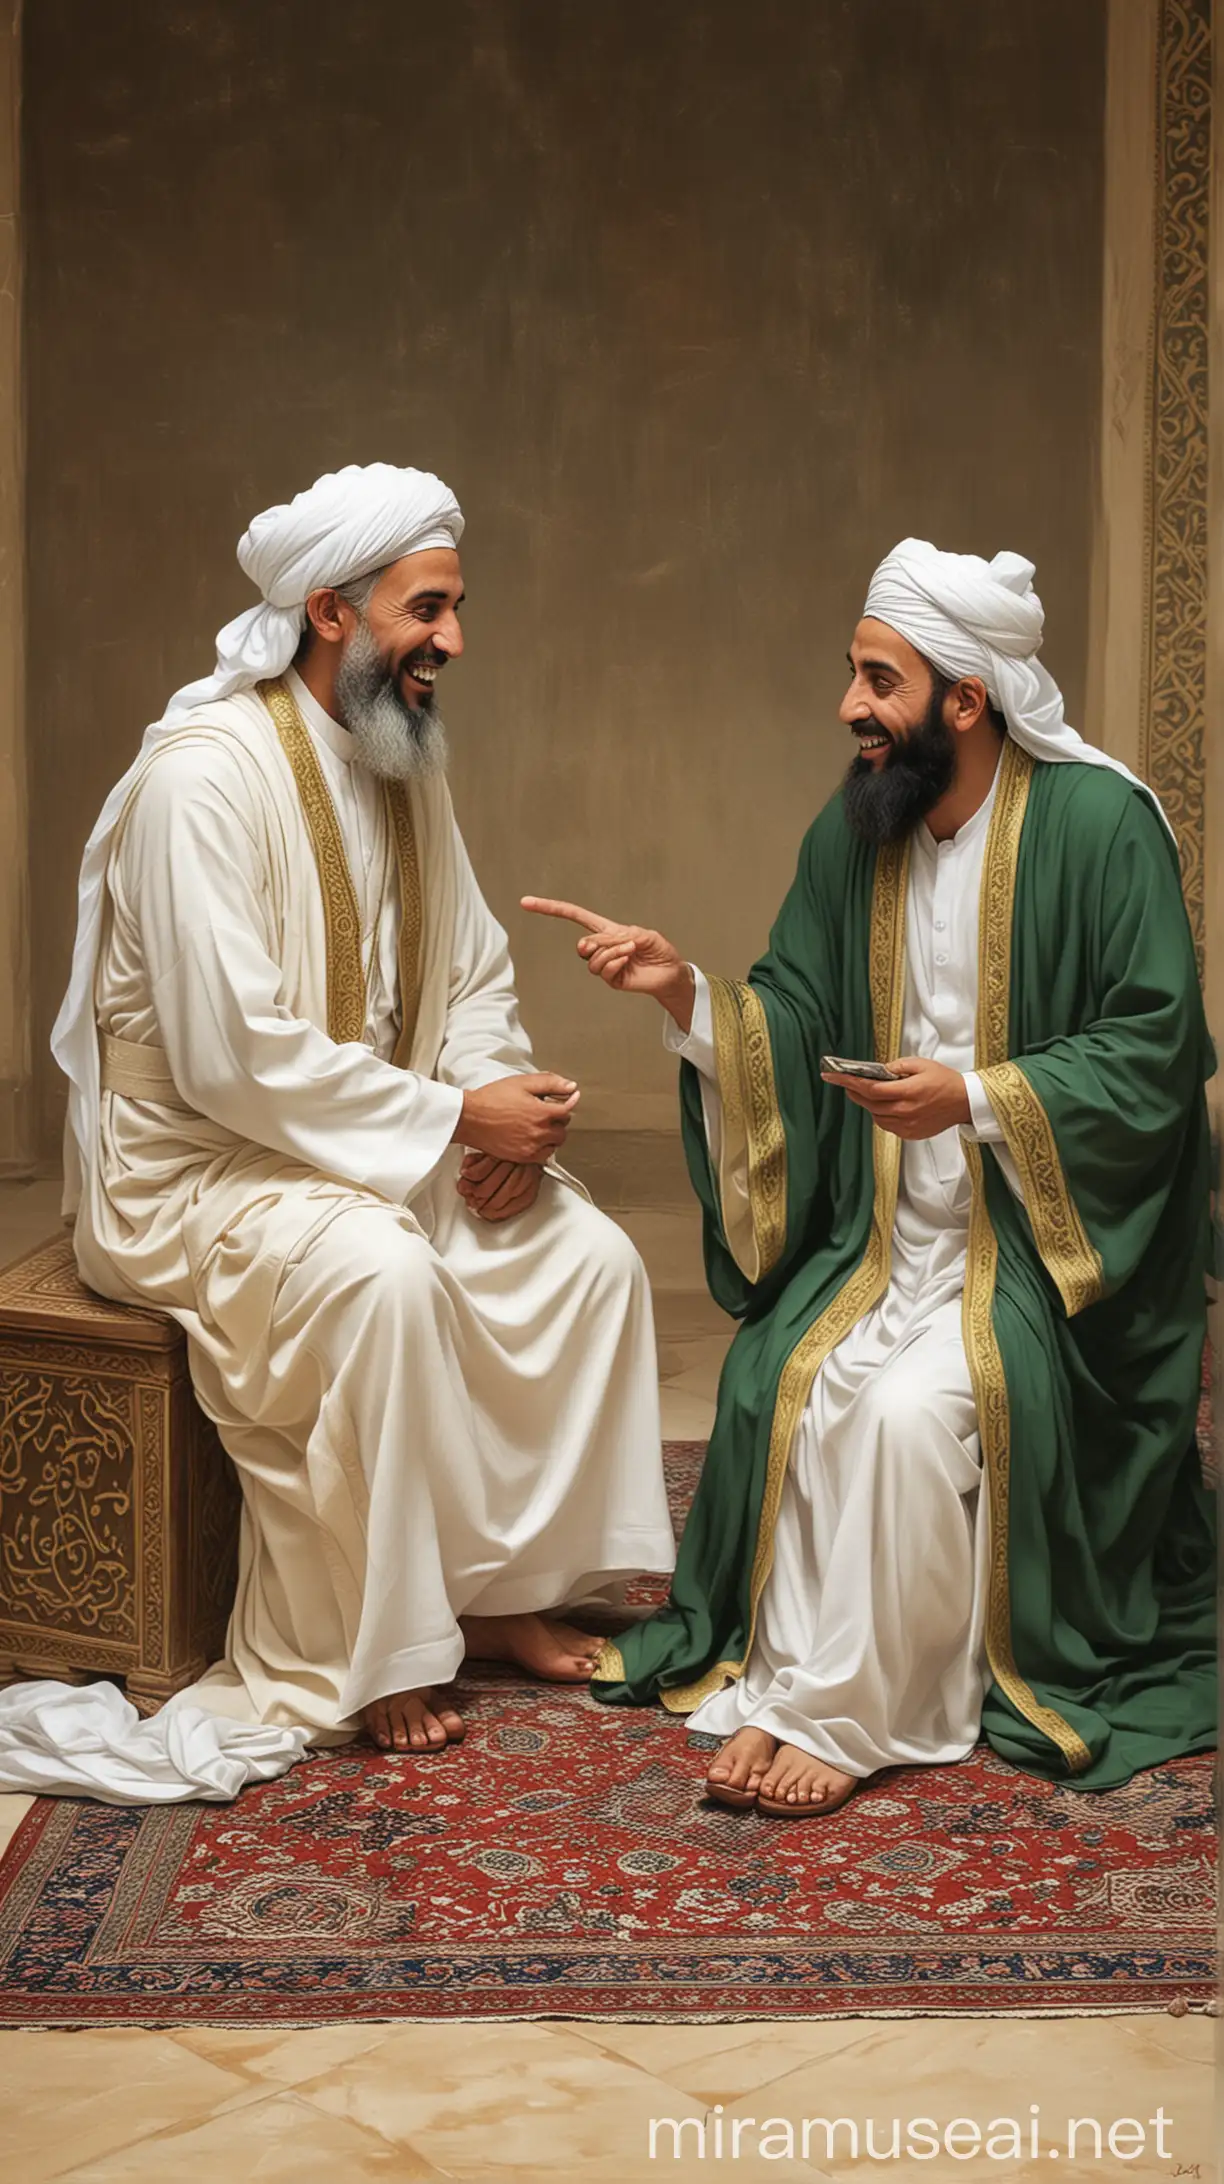 An illustration of Hazrat Abu Huraira (RA) sitting with Prophet Muhammad (PBUH), sharing a light moment.
Description: Abu Huraira (RA) is depicted smiling while sharing a humorous anecdote with the Prophet (PBUH), showcasing their close bond and camaraderie. islamic tradition